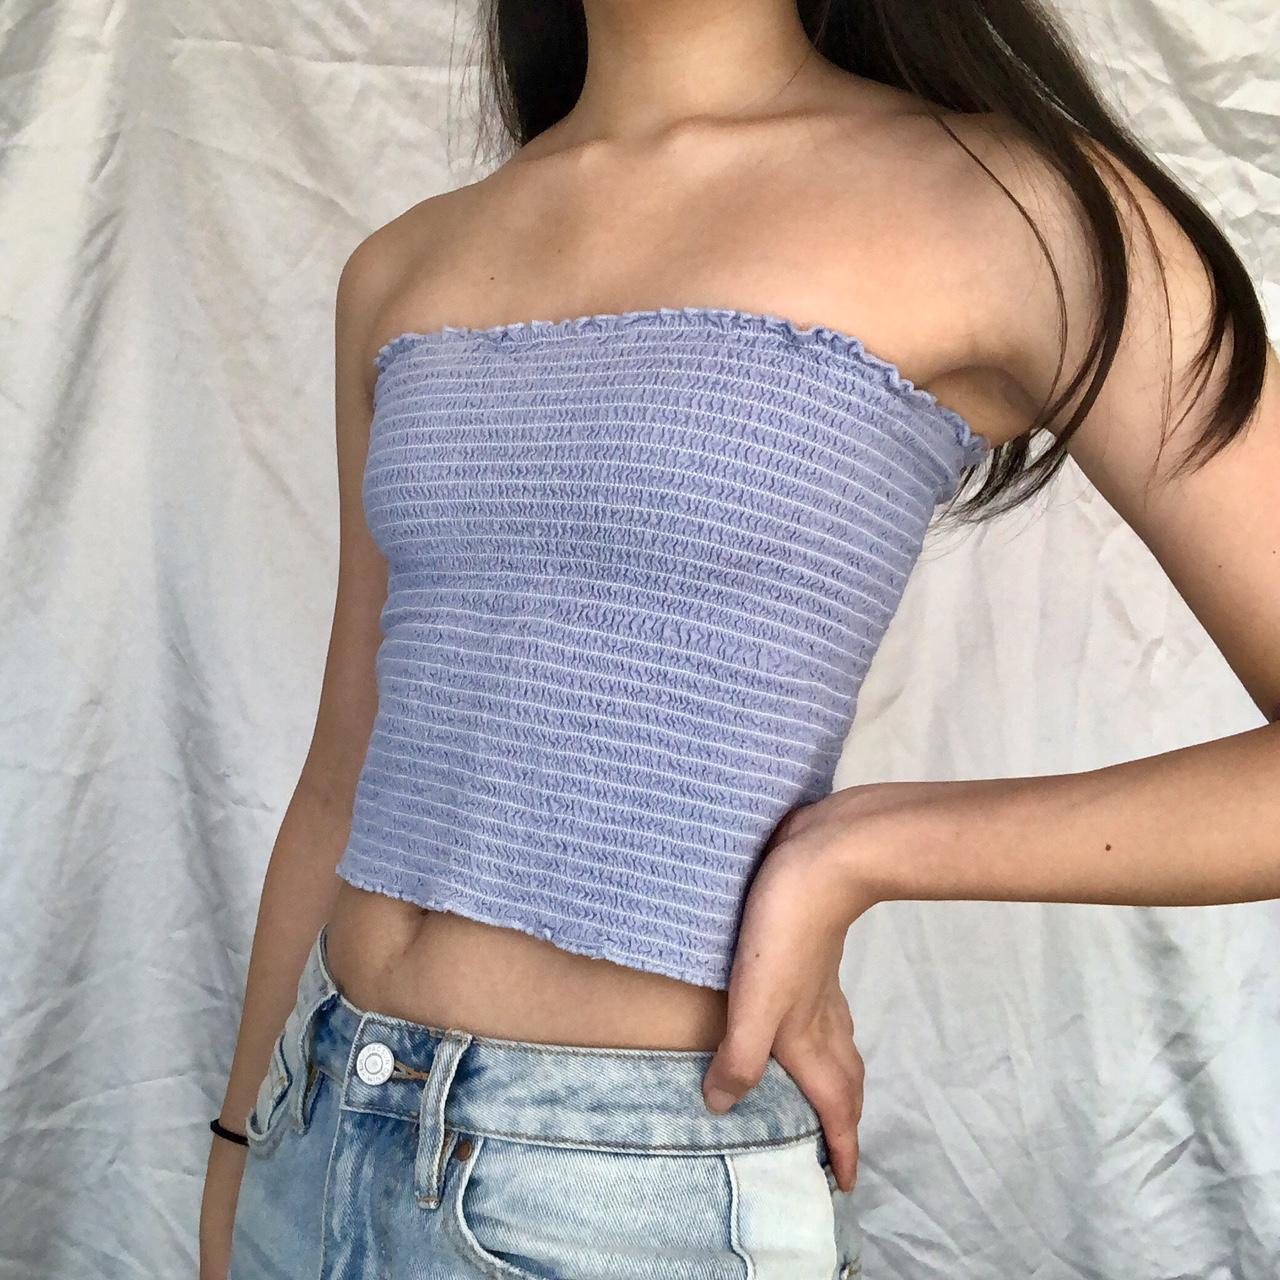 Brandy Melville Tube Top. One size. Perfect - Depop